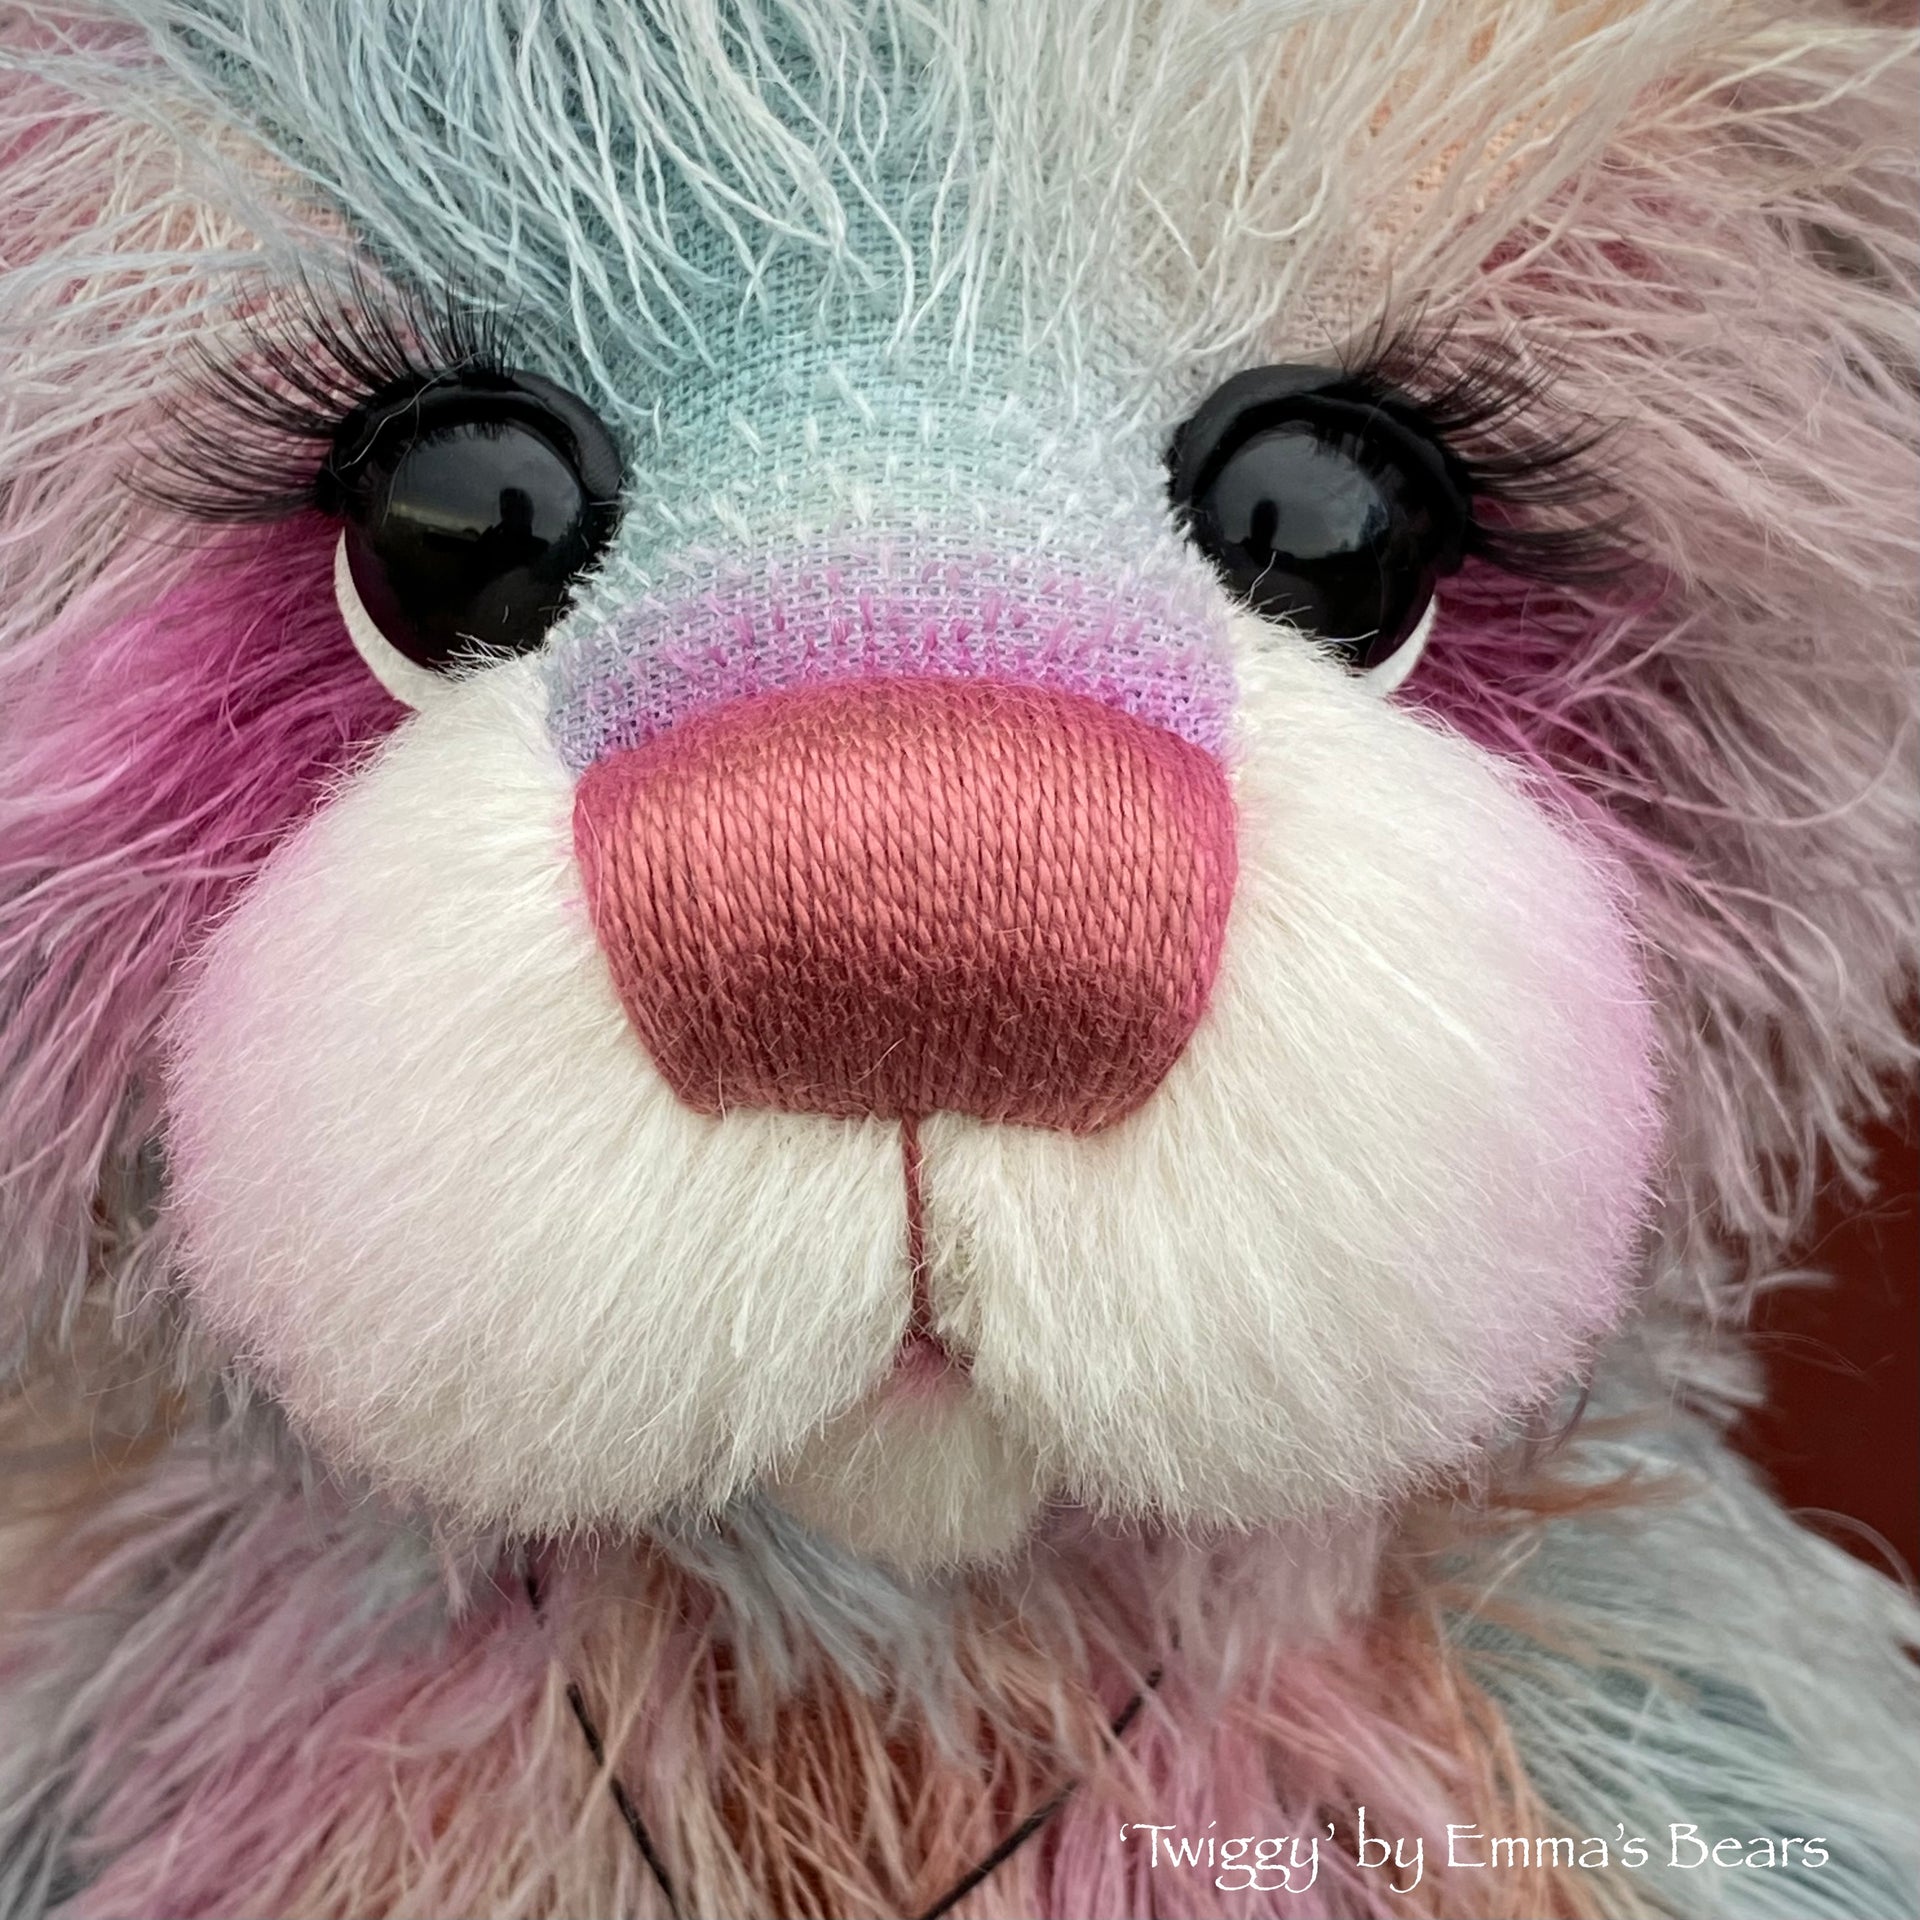 Twiggy - 16" SPECIAL 25th Anniversary Collection Hand-dyed mohair Artist Bear by Emmas Bears - OOAK